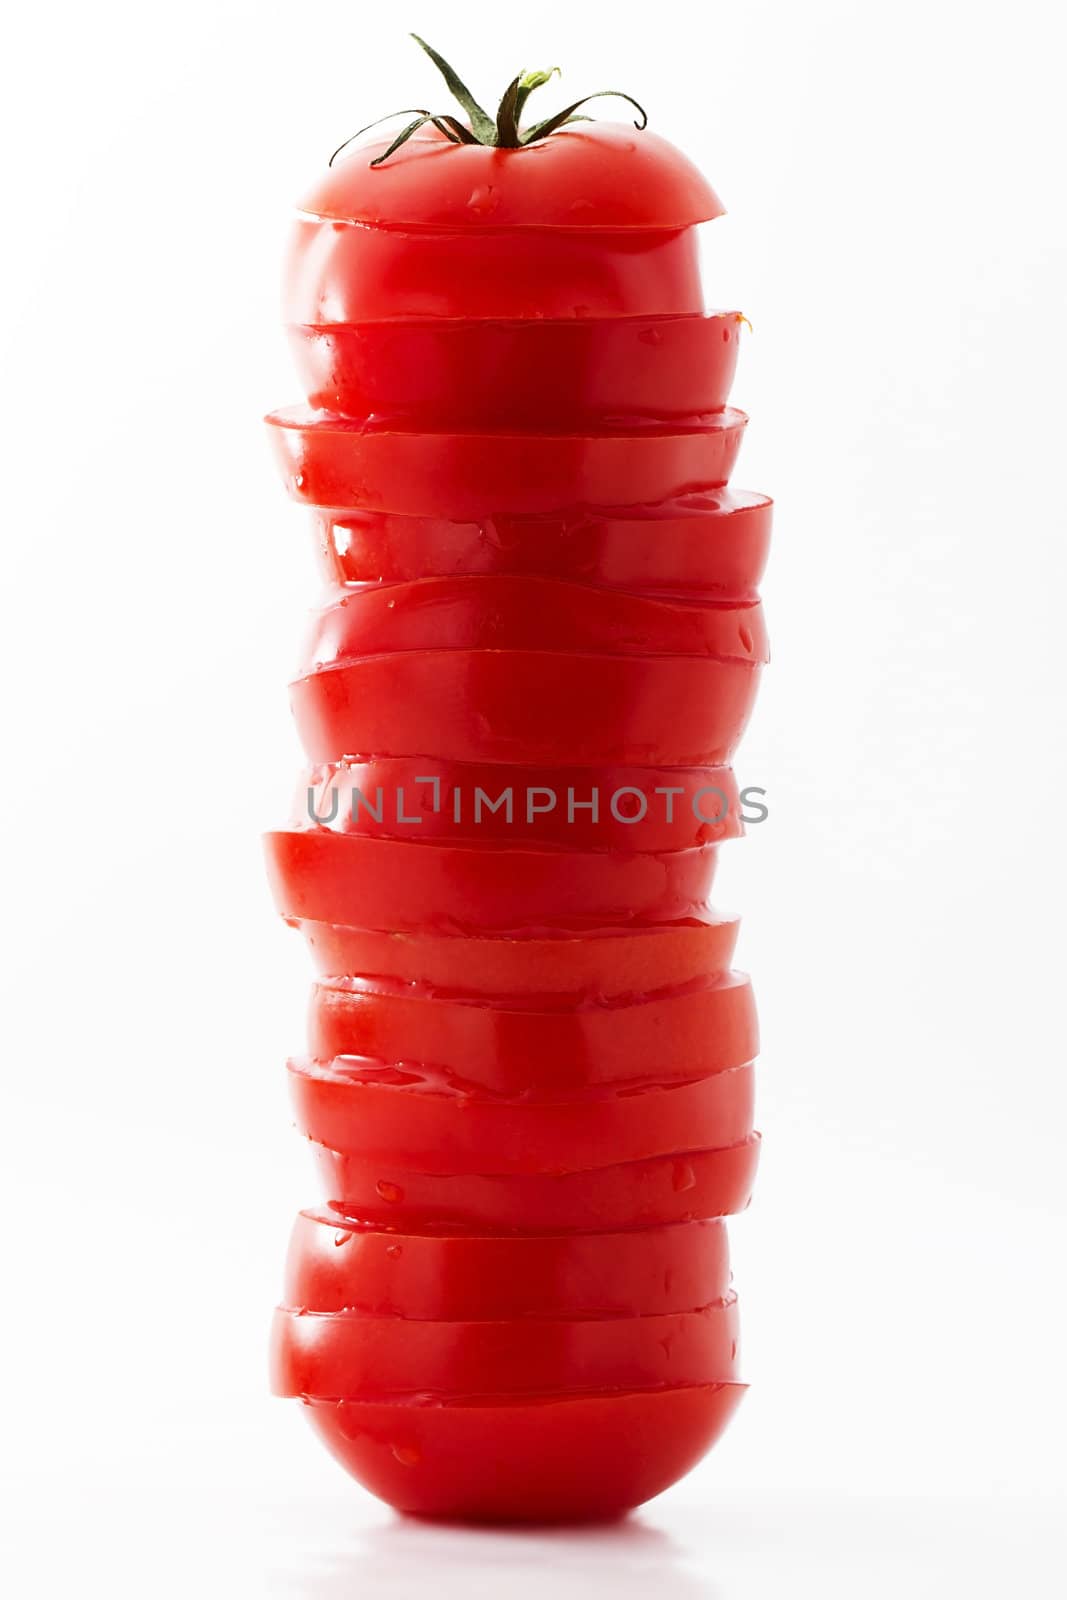 one tower made of tomato blades on white background